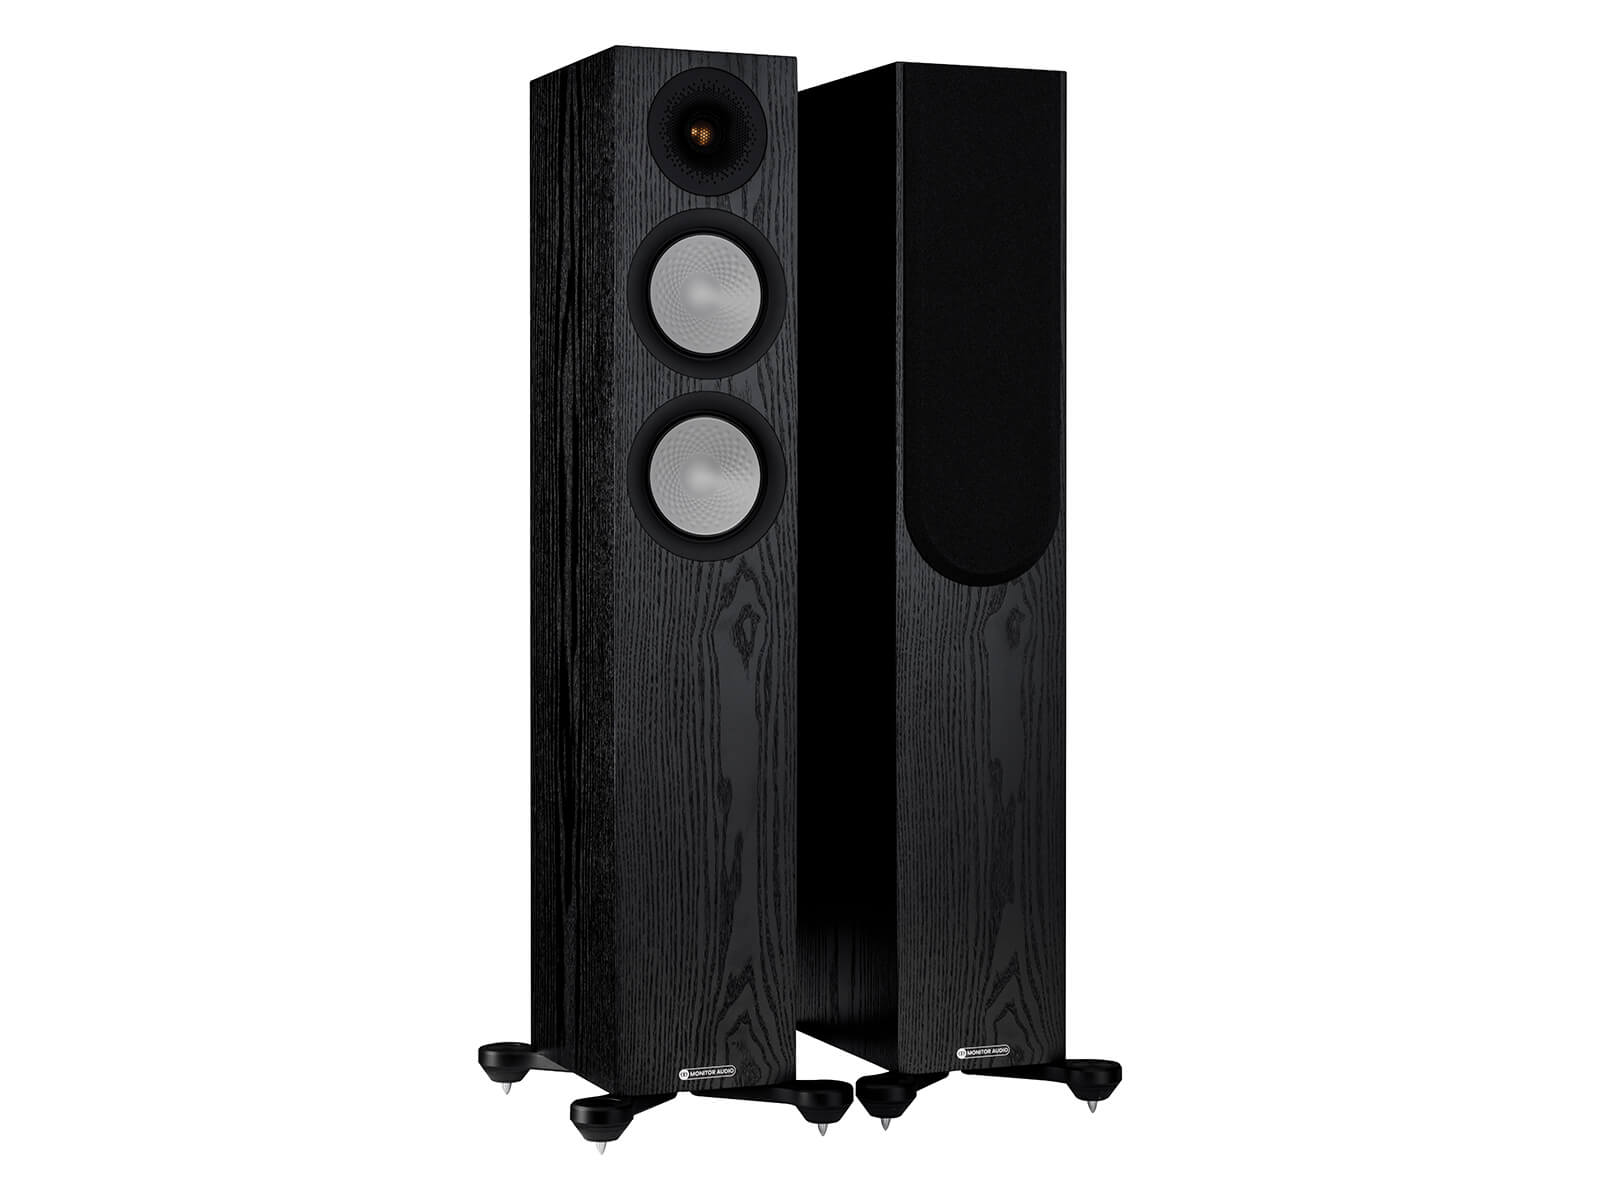 A pair of Monitor Audio's Silver 200 7G, in a black oak finish, iso view, with and without grilles.